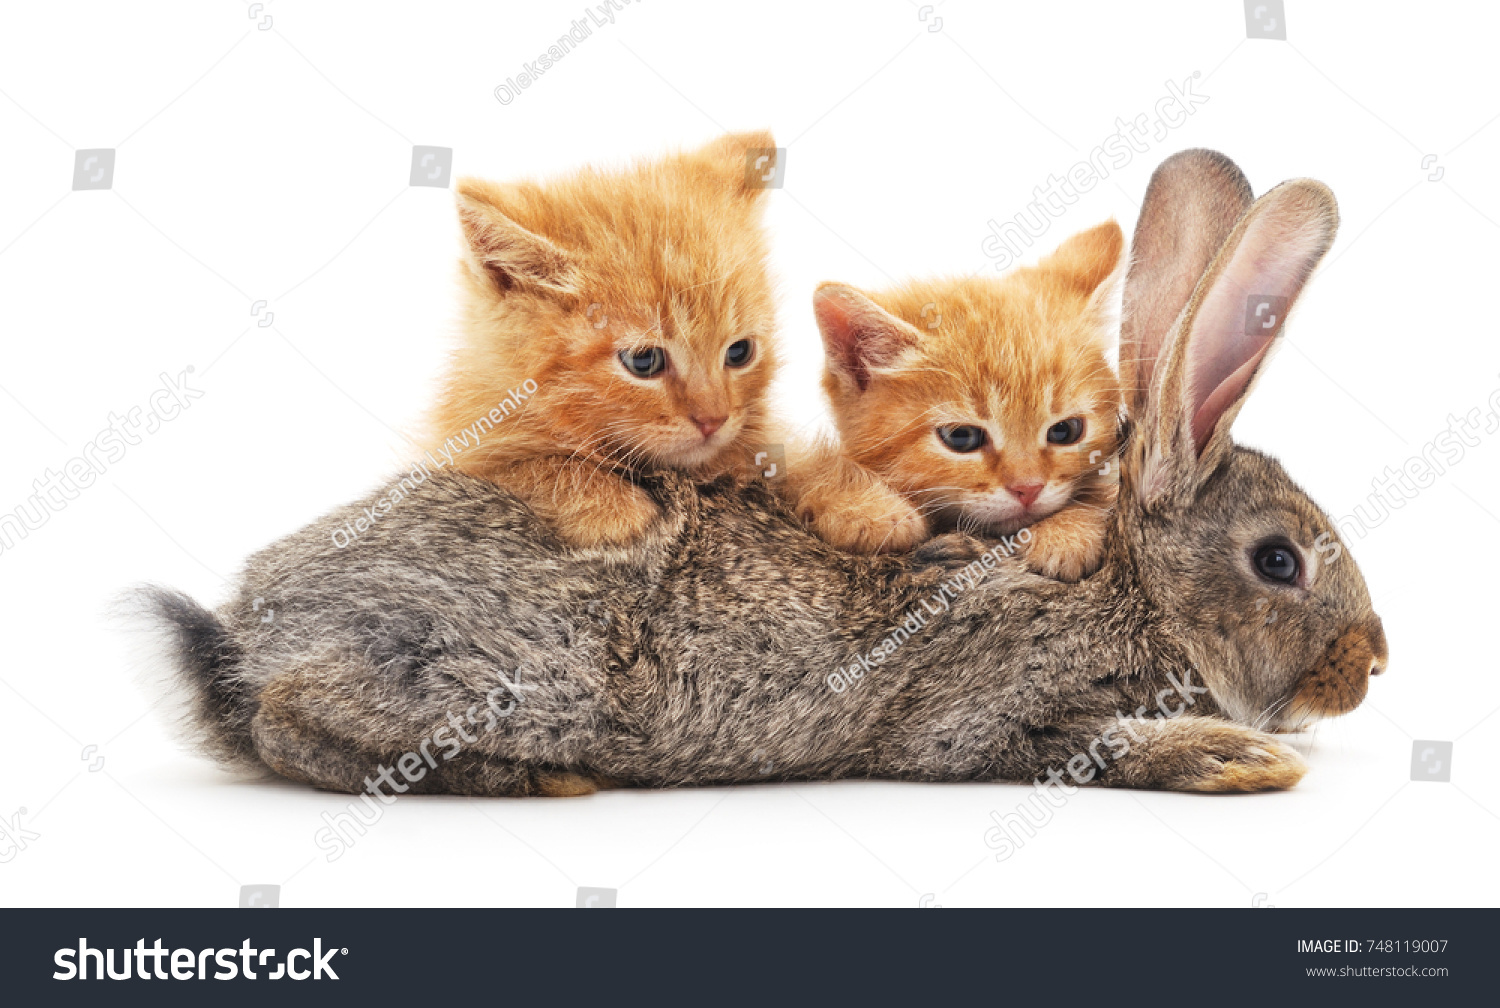 Red Kittens Bunny On White Background Stock Photo 748119007